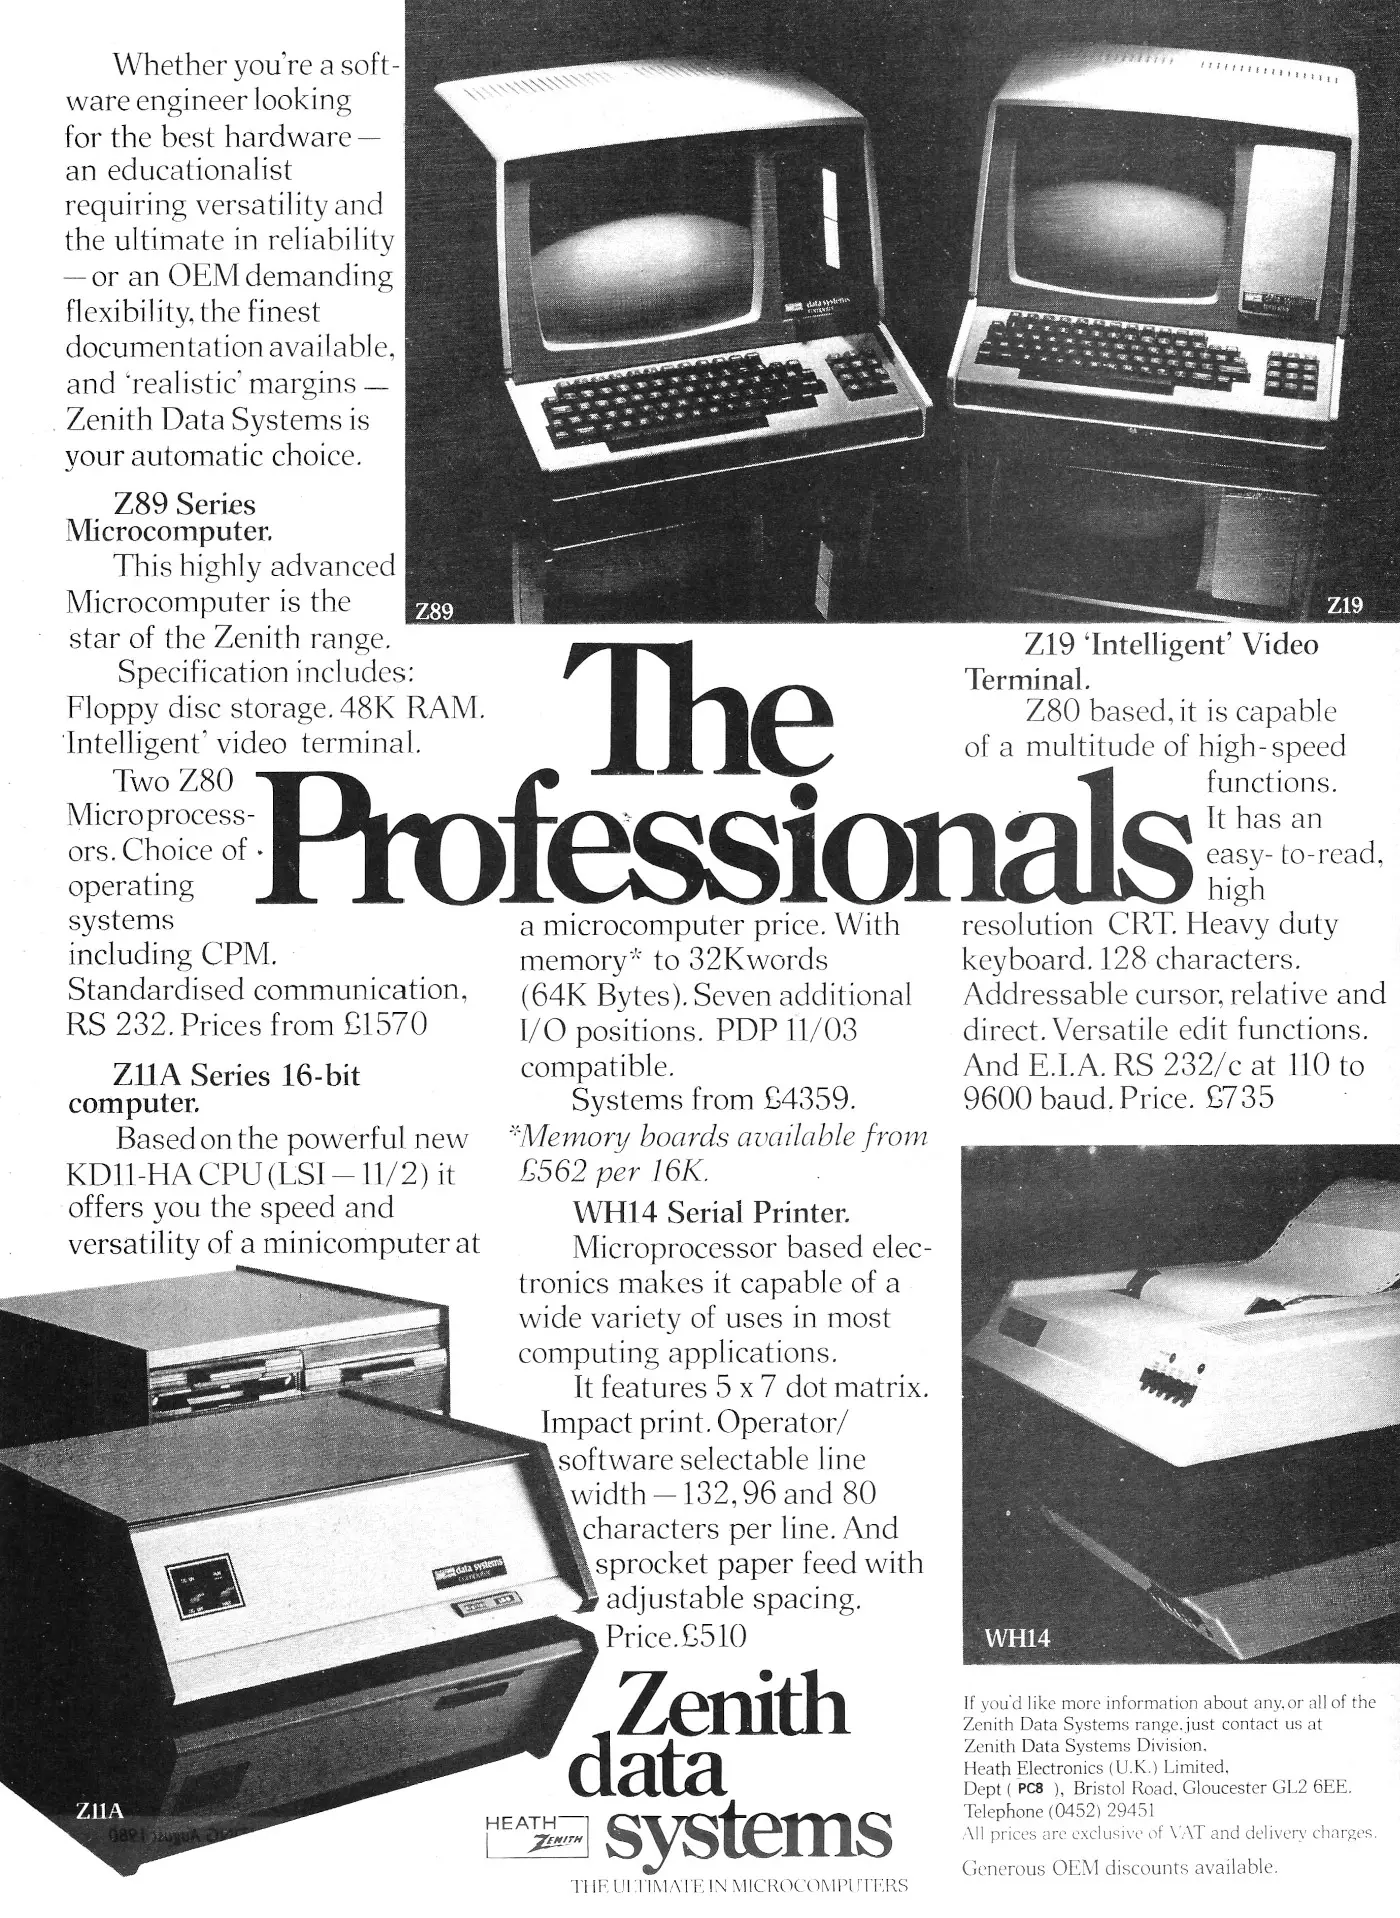 Zenith Data Systems Advert: The profesionals - Zenith Data Systems, from Practical Computing, August 1980